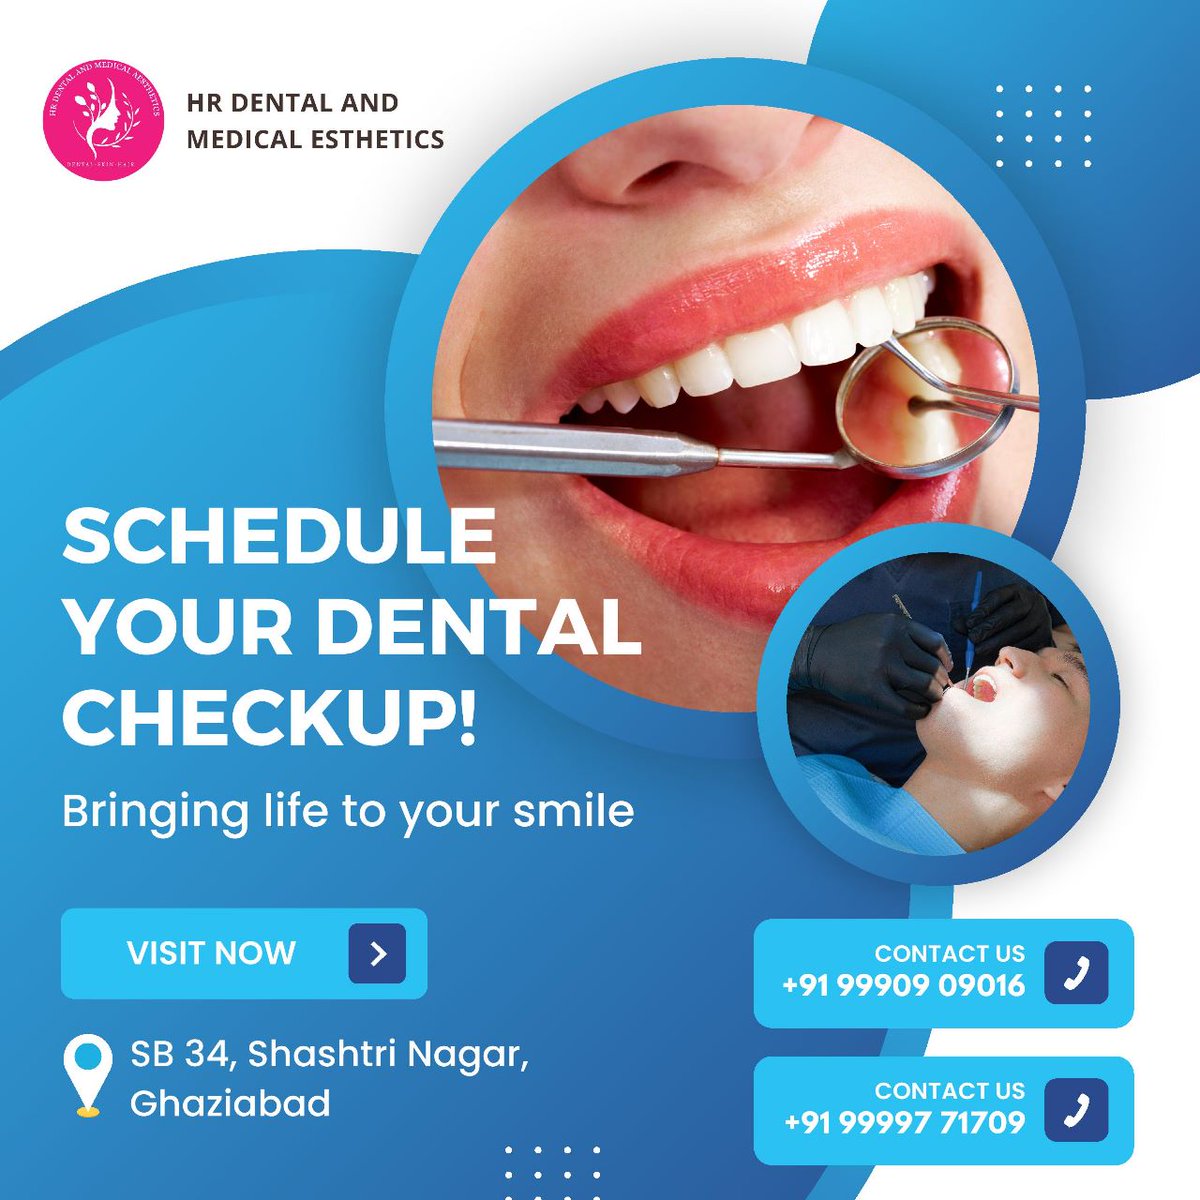 Schedule your Dental Checkup with HR Dental And Medical Aesthetics!

Your smile deserves the best care, so book your appointment now!

For bookings, call Dr. Himani Bhardwaj at +91 99997 71709 or visit our clinic at SB 34, Shashtri Nagar, Ghaziabad.

#DentalCheckup #hrdentalcare